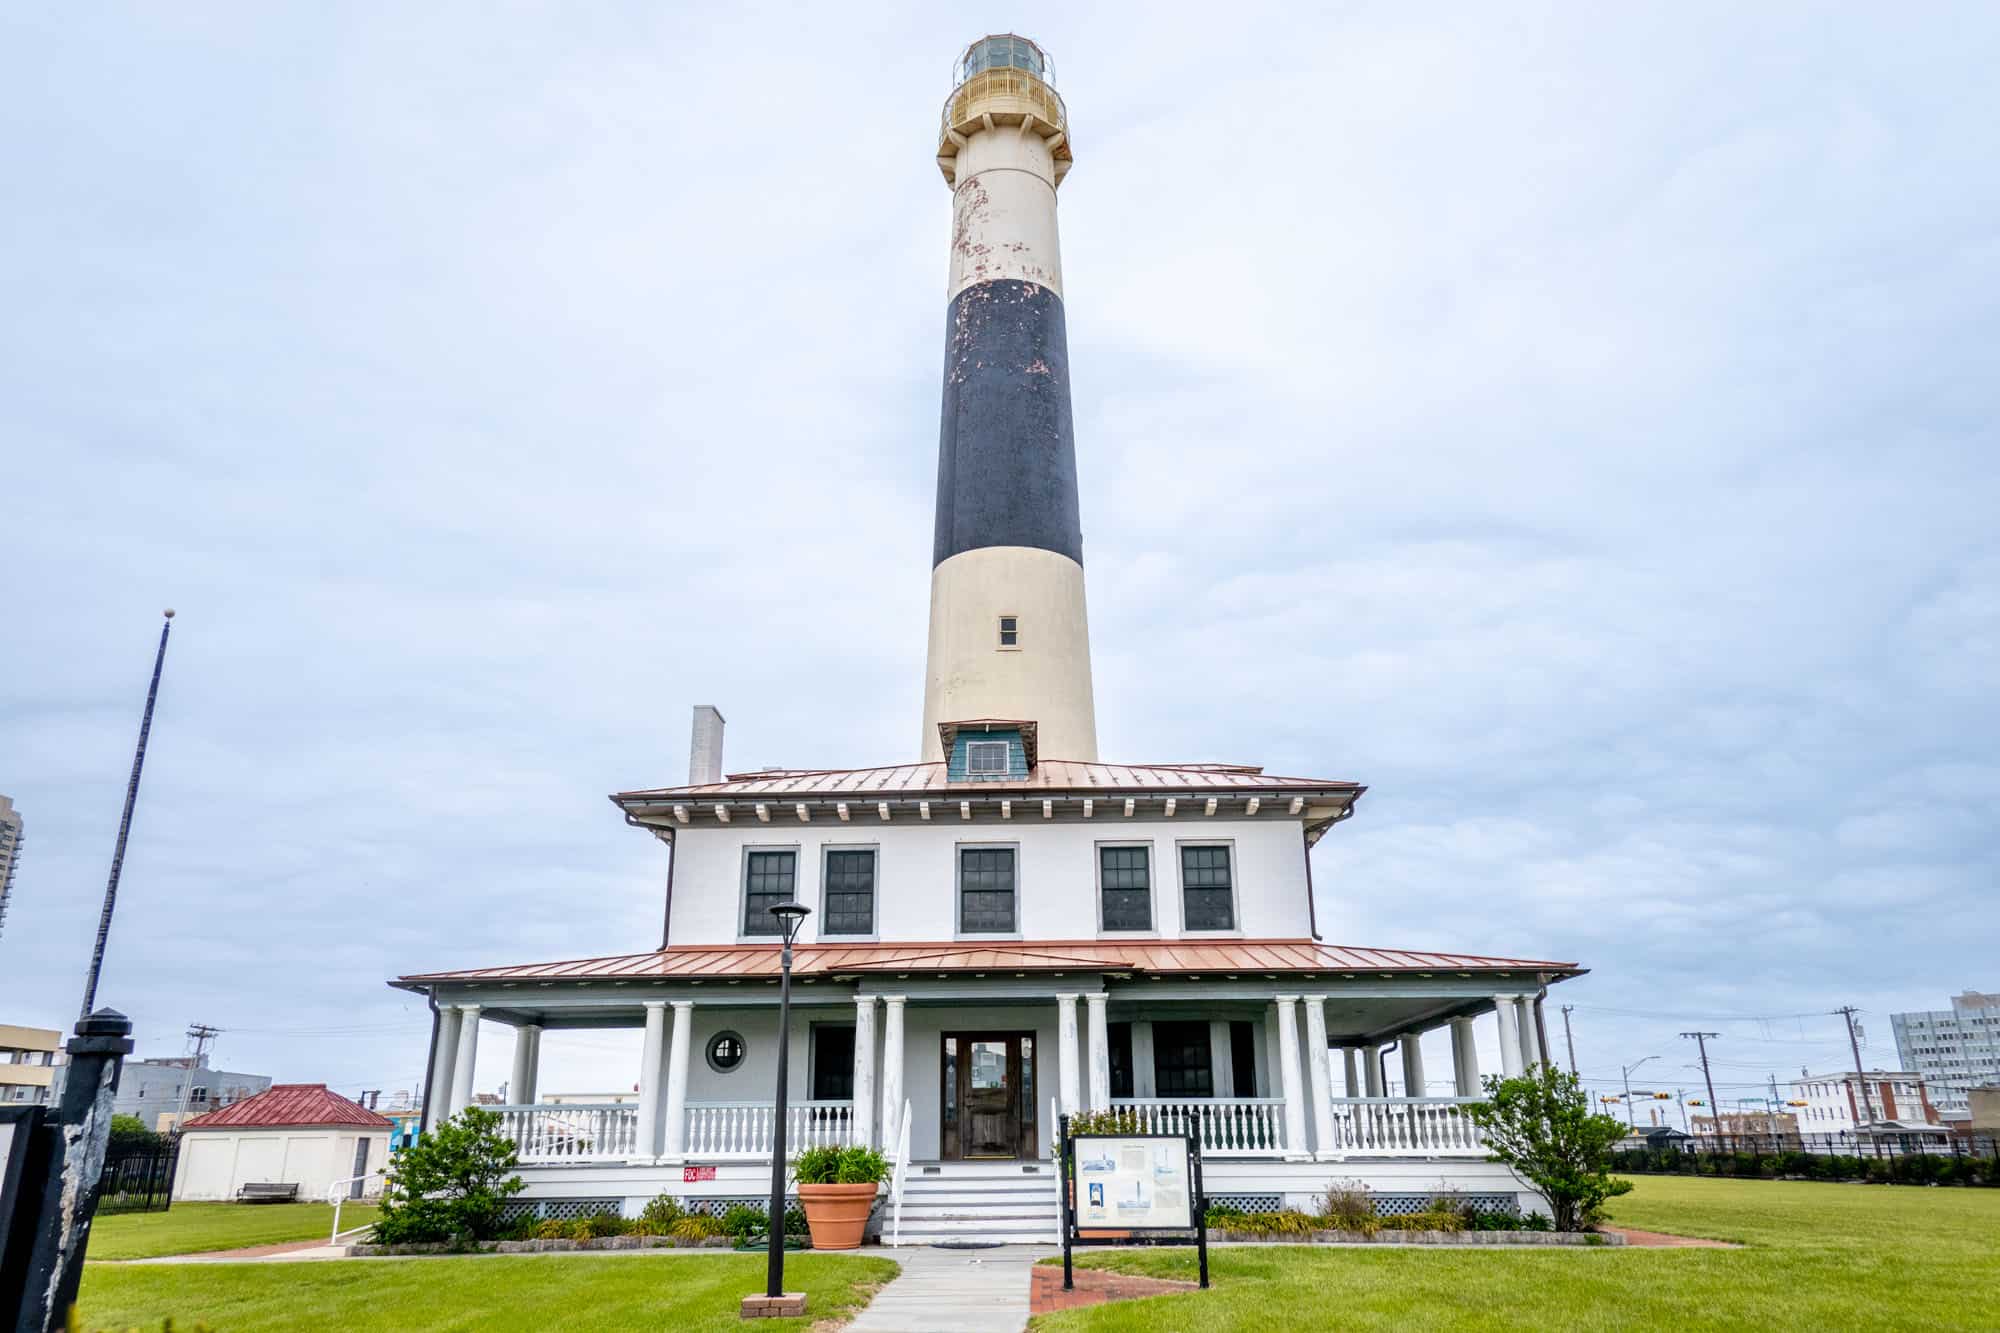 Black and white lighthouse with a 2-story build at its base